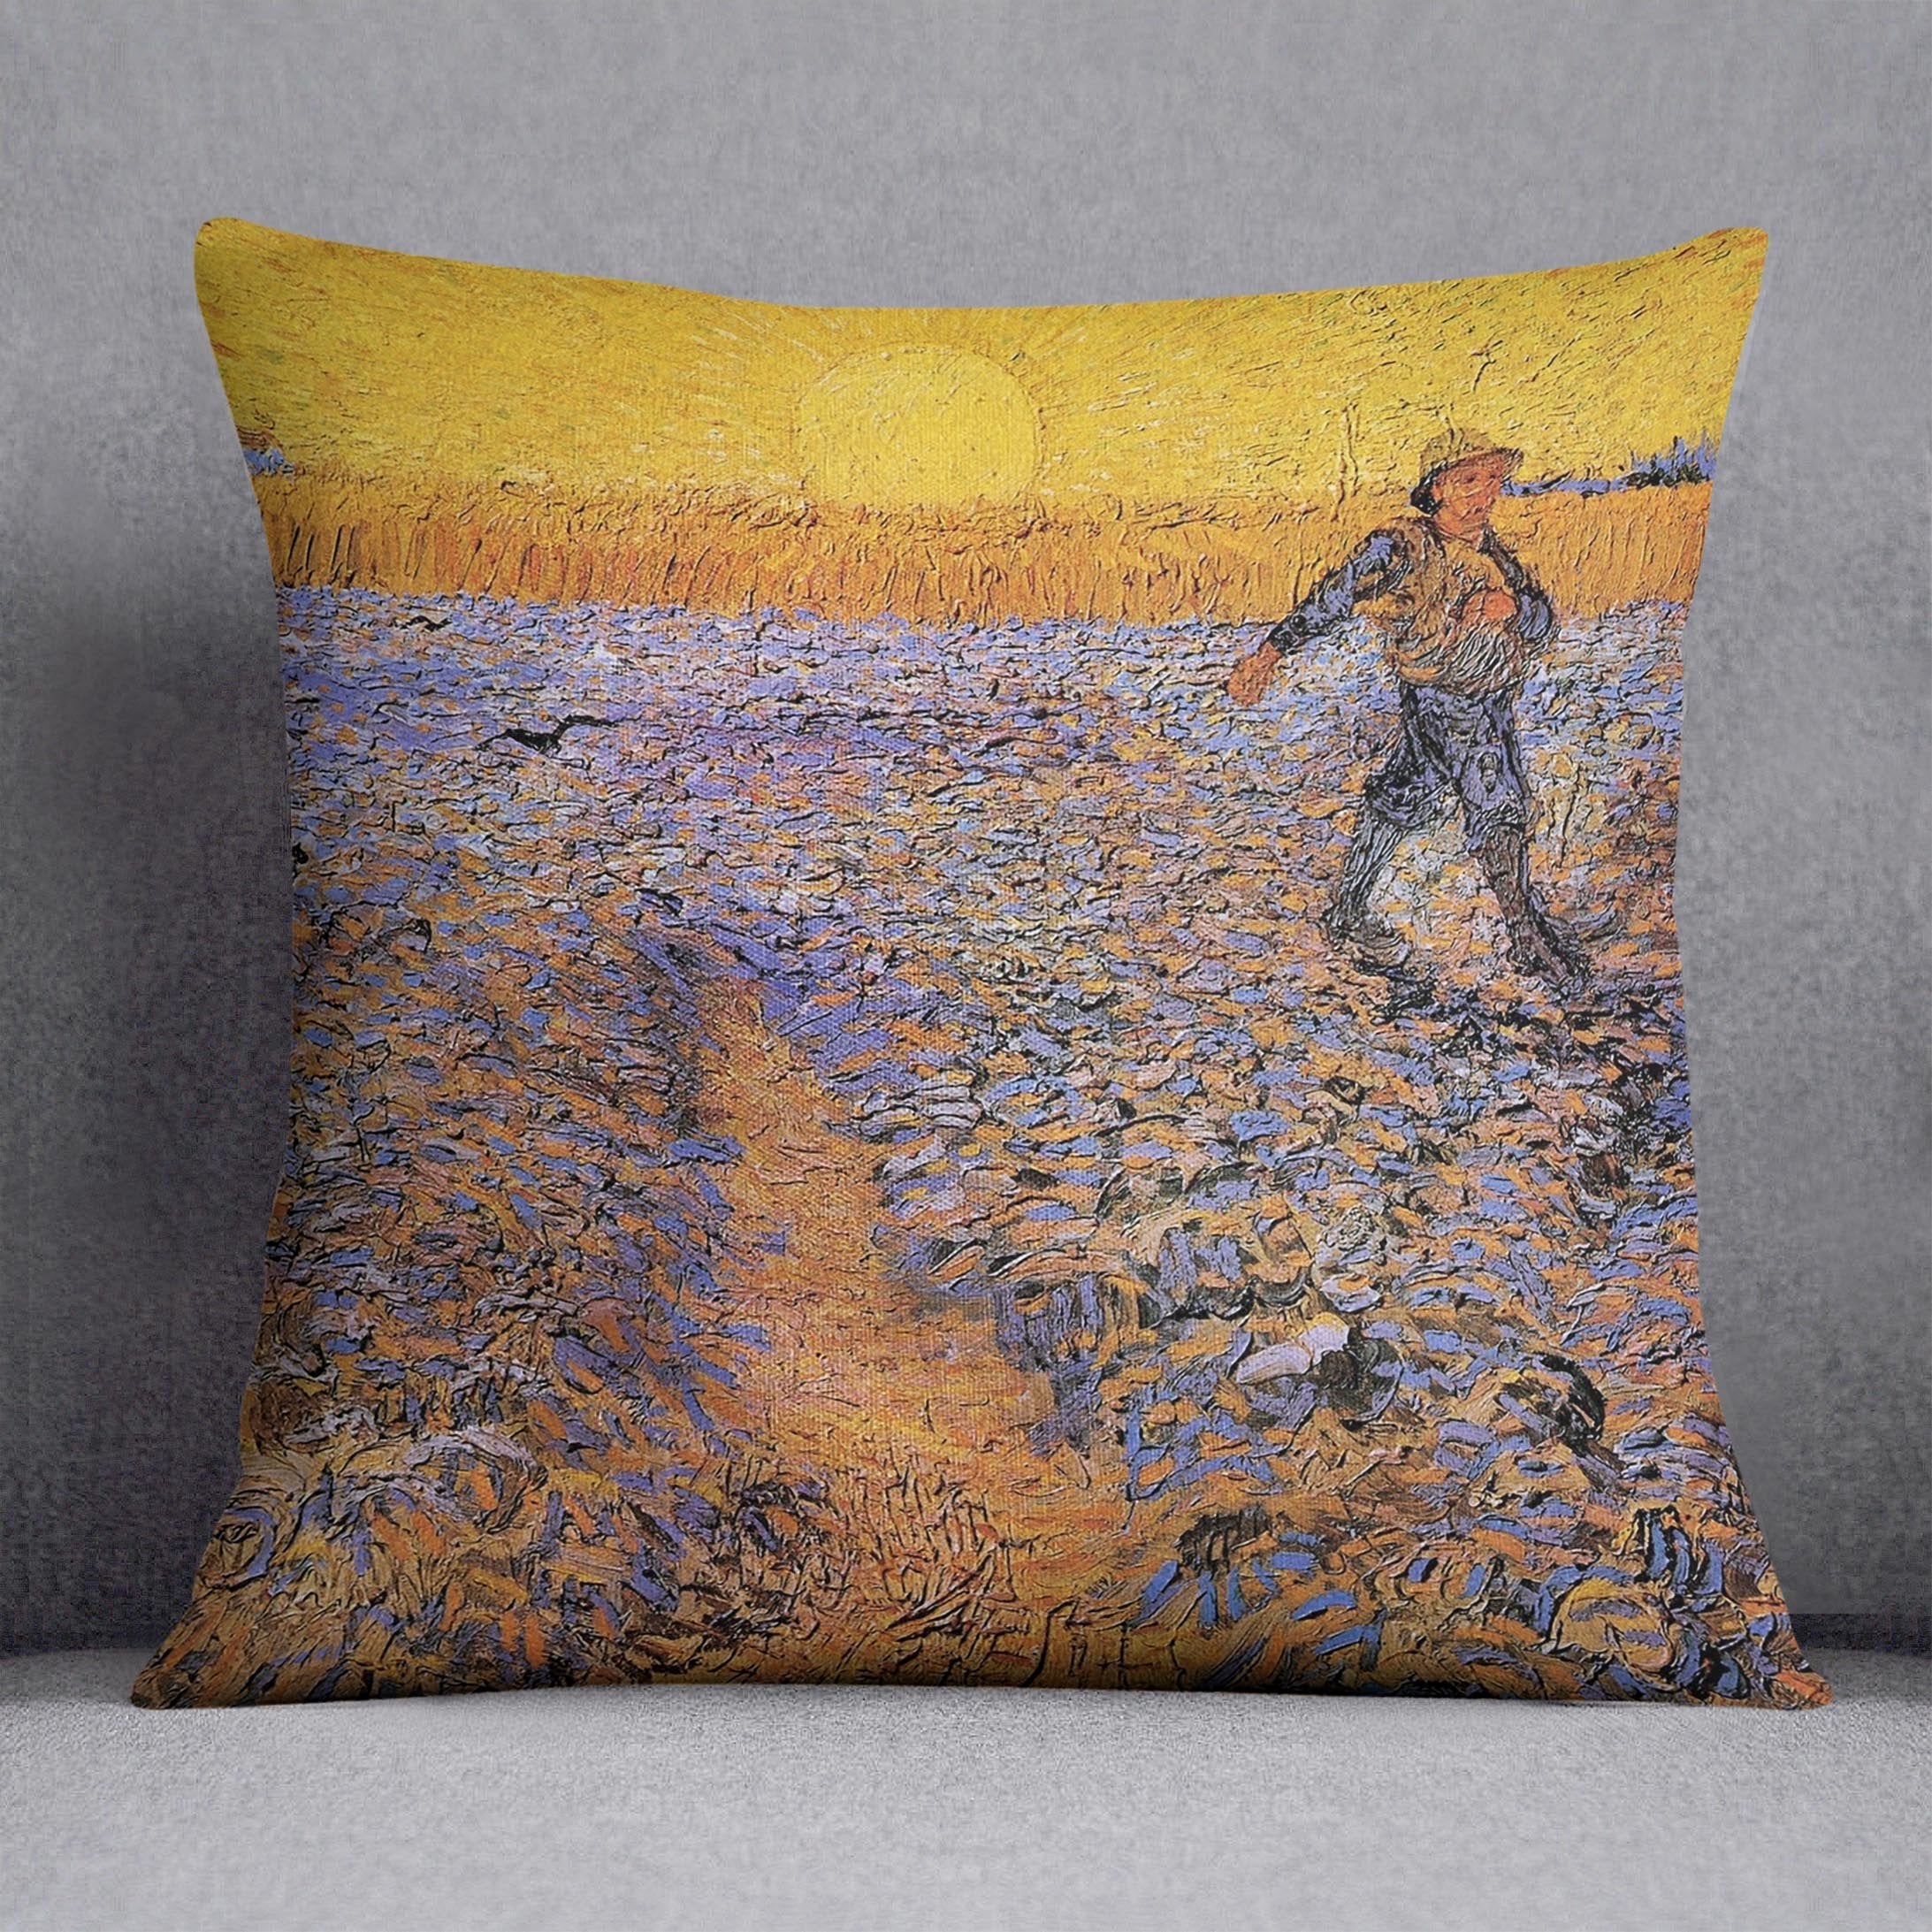 The Sower 3 by Van Gogh Throw Pillow